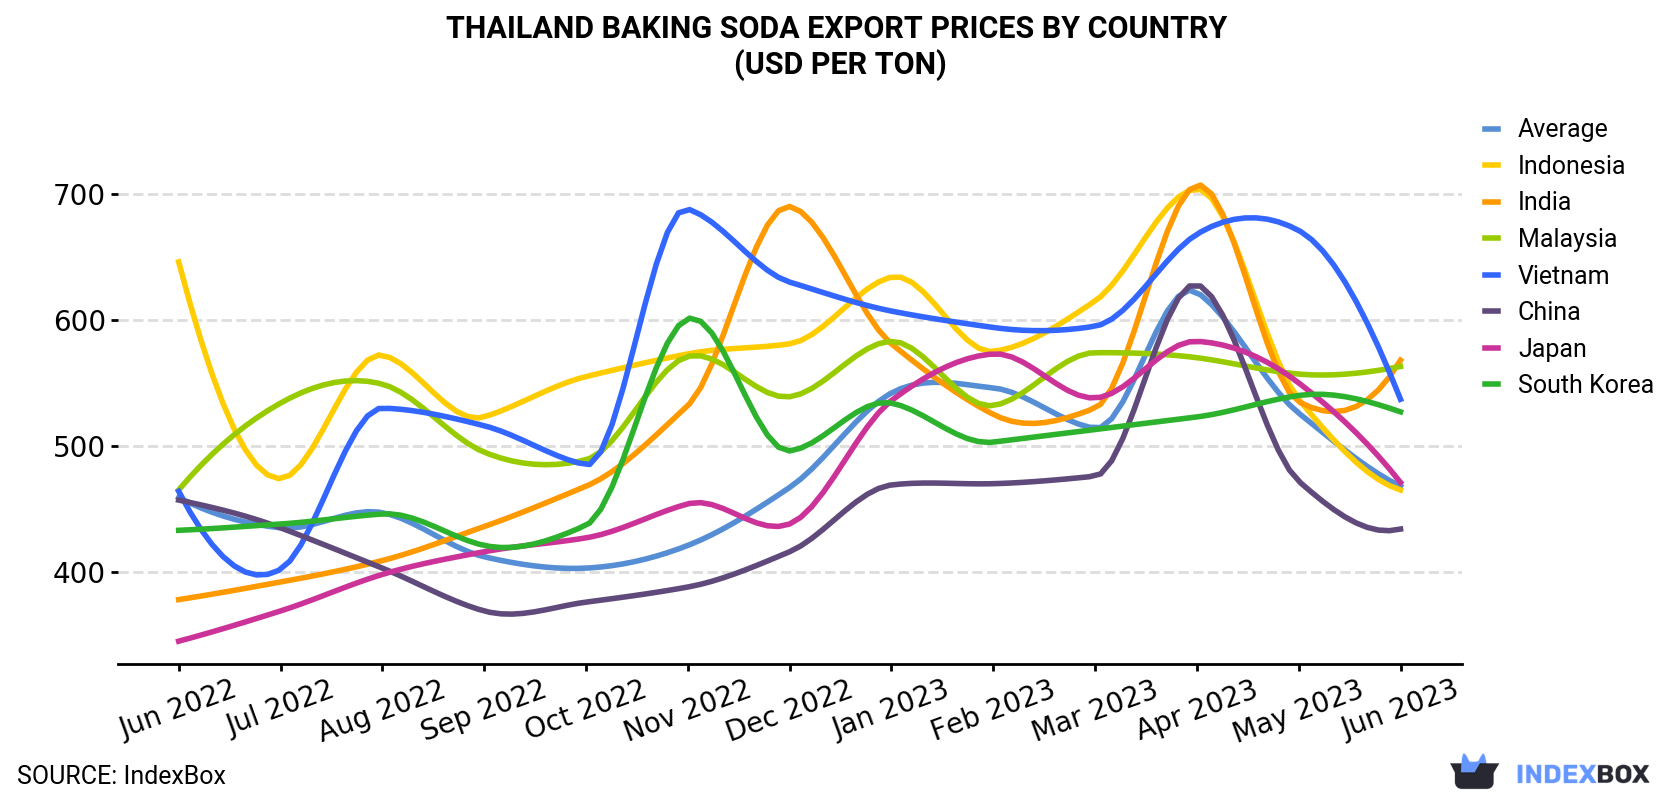 Thailand Baking Soda Export Prices By Country (USD Per Ton)